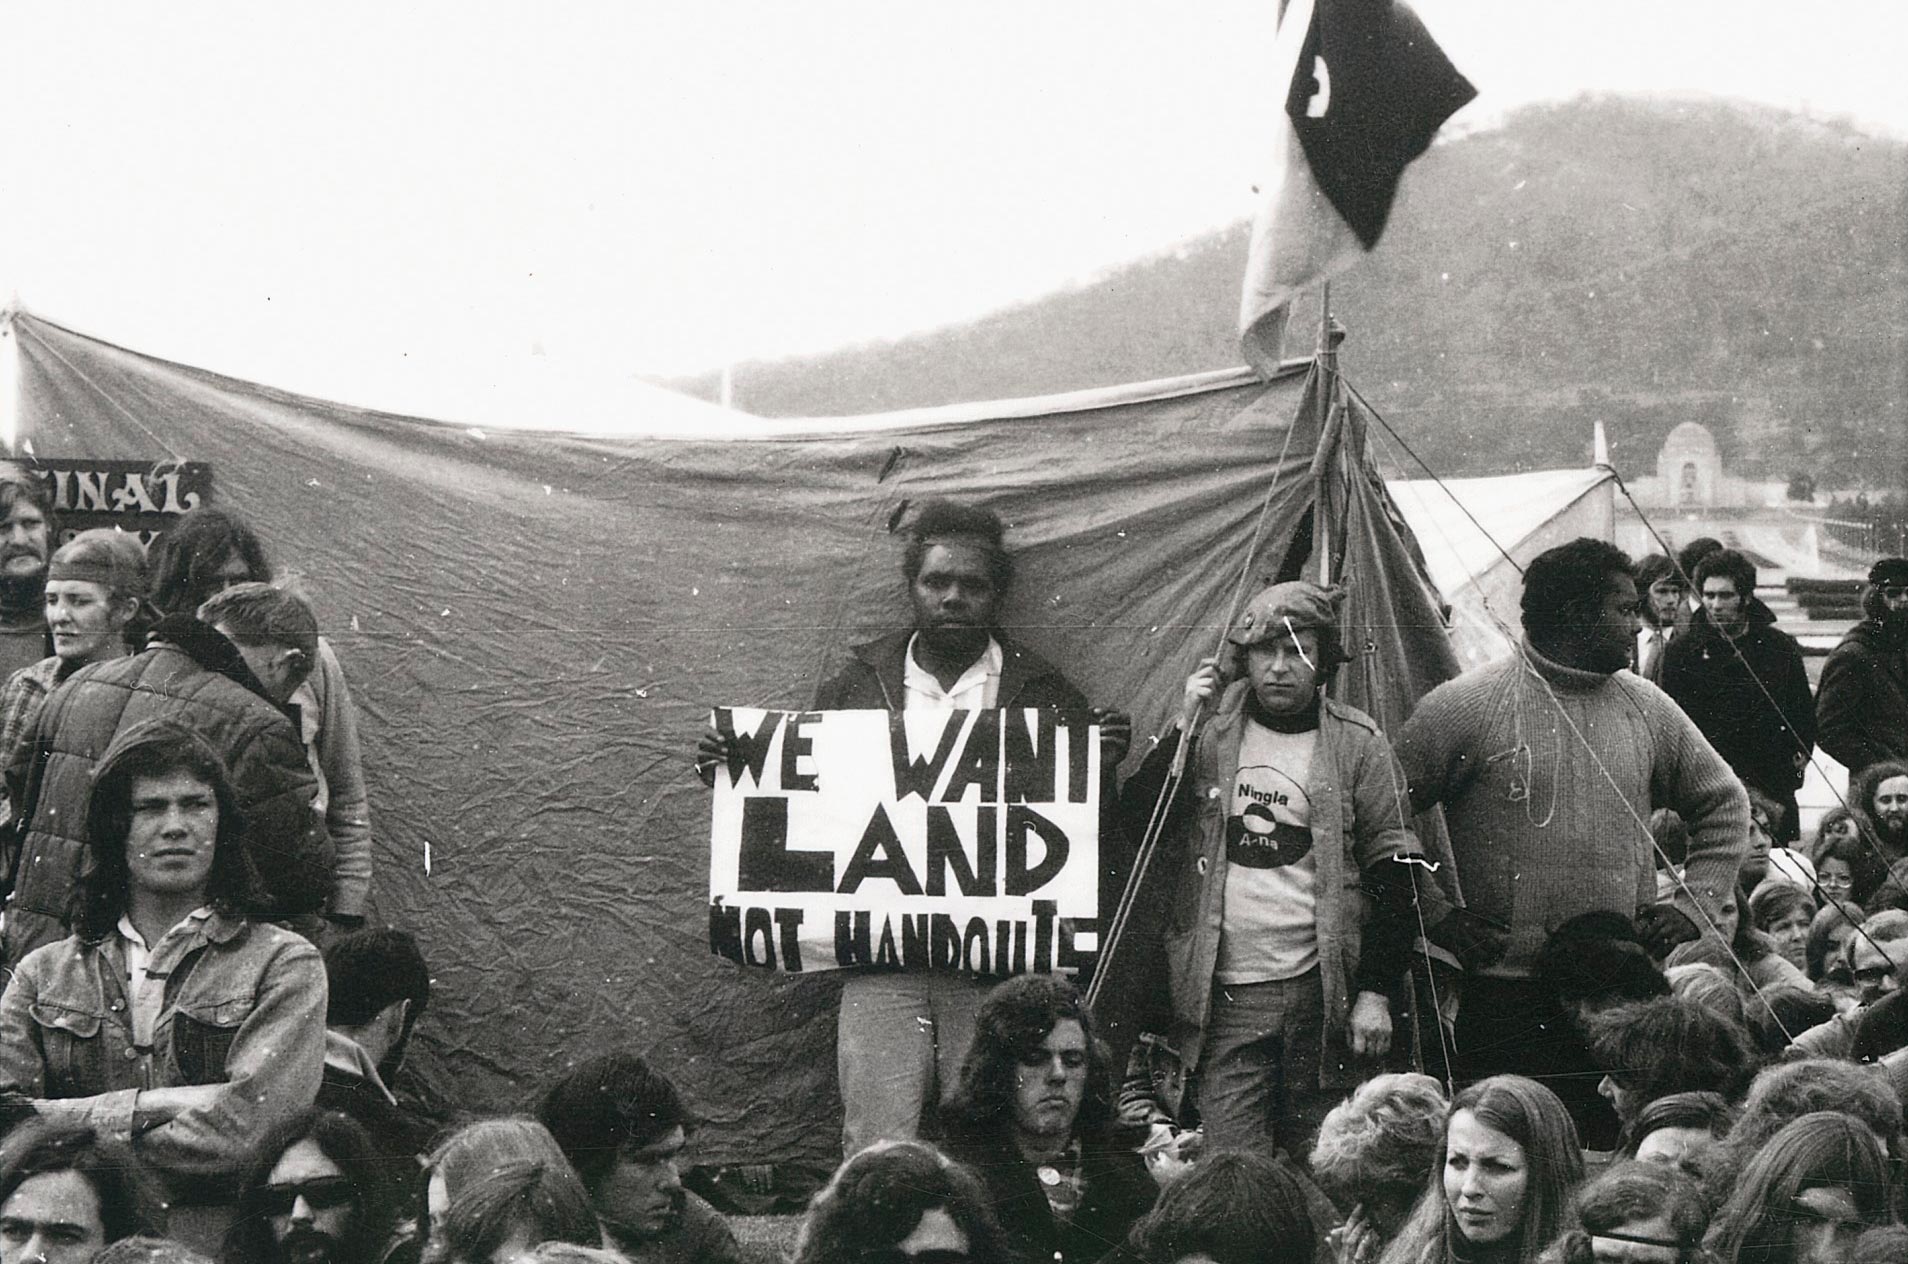 <p>Demonstration with ‘We want land not handouts’ placard at Parliament House, Canberra, 30 July 1972</p>
